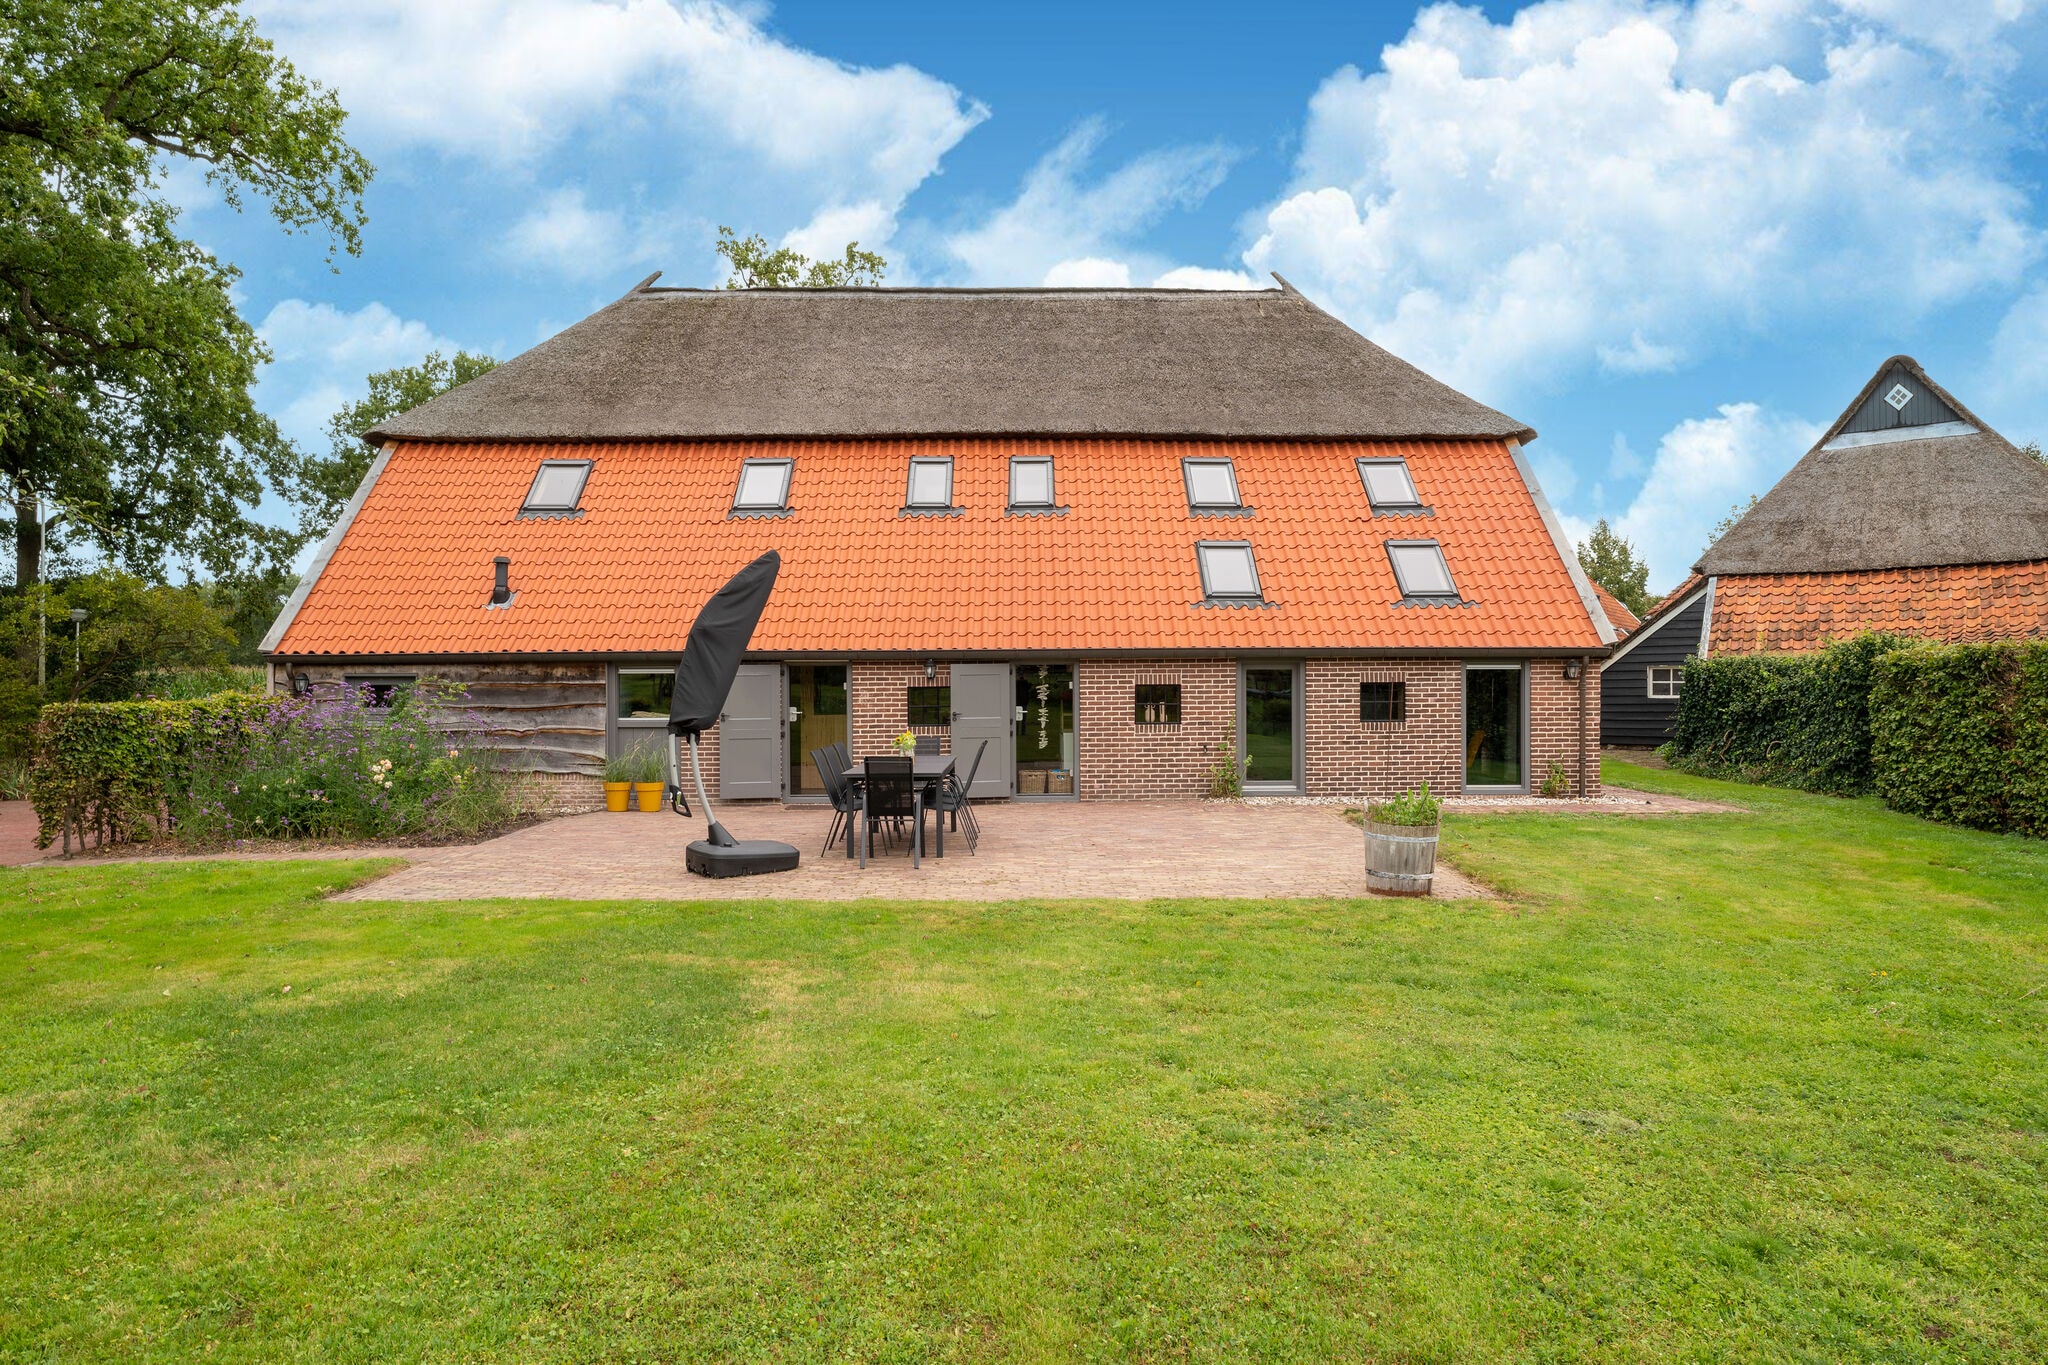 Holiday home in IJhorst in woody surroundings